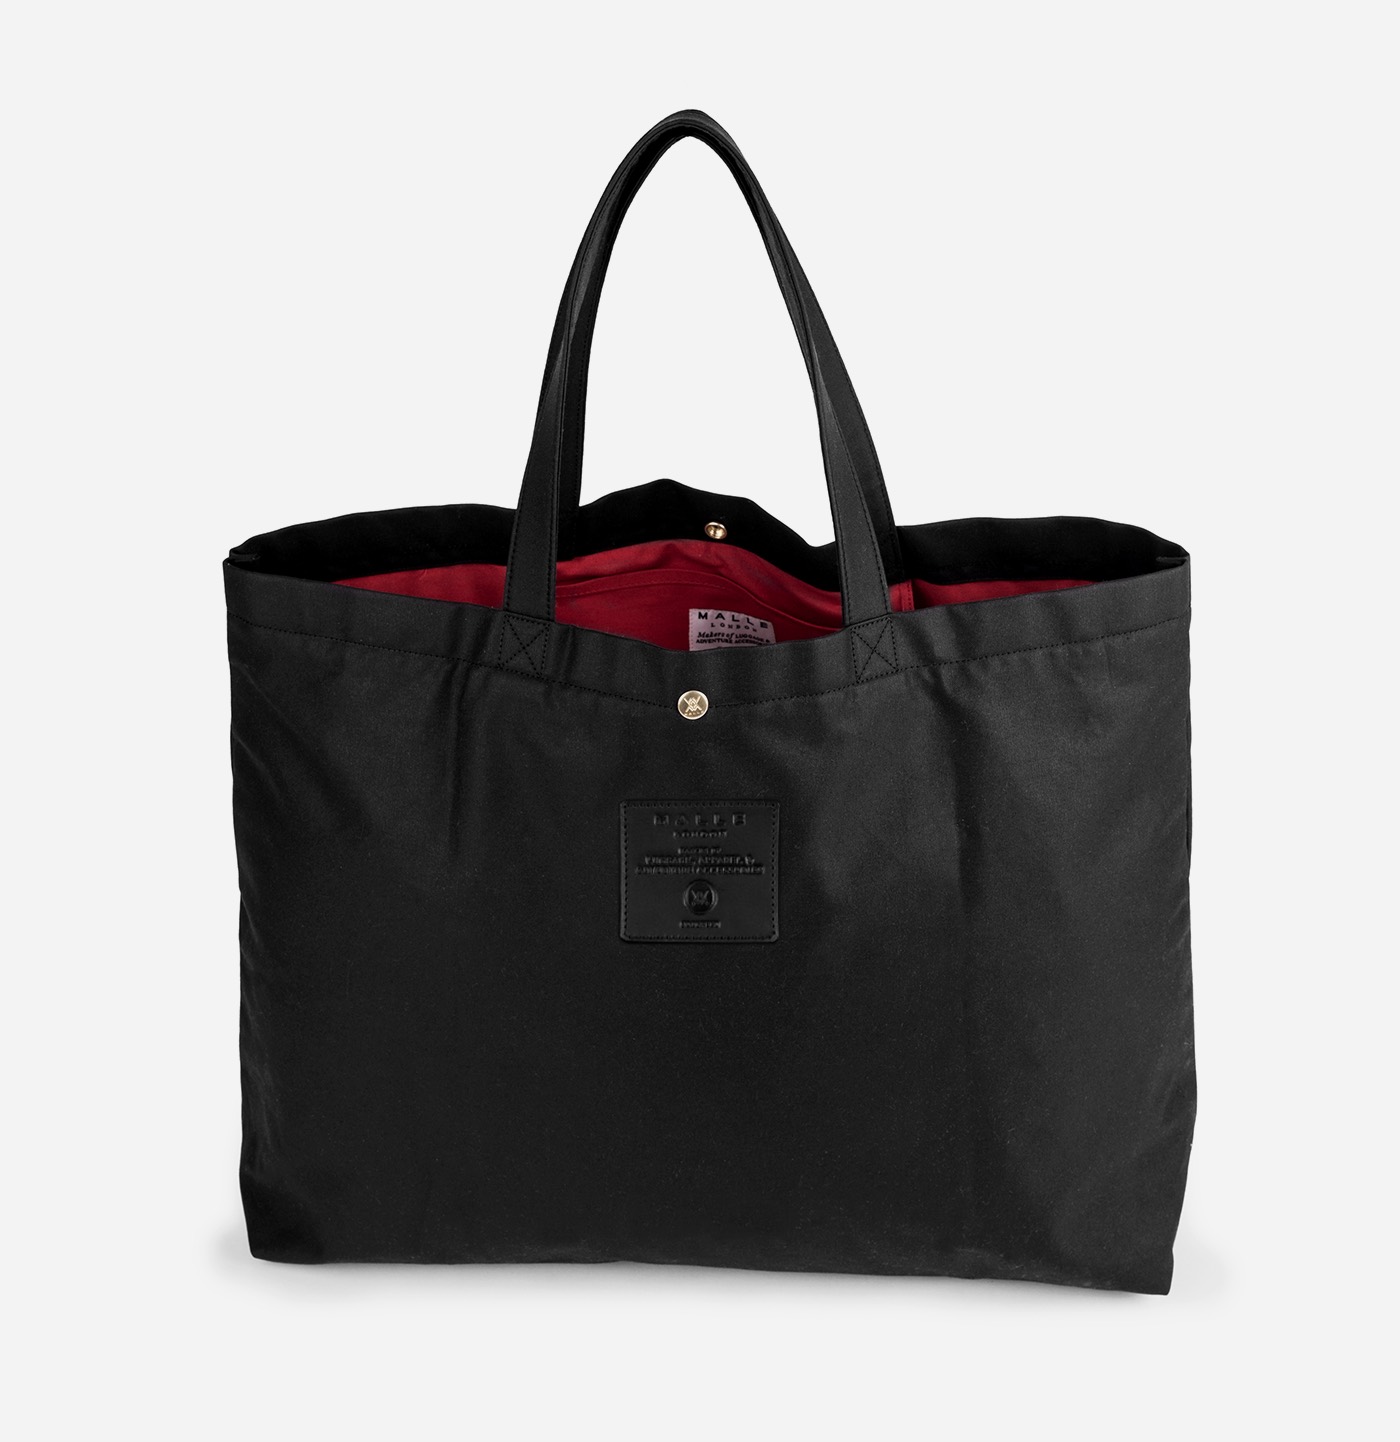 Lawrence Lightweight Tote - Malle London